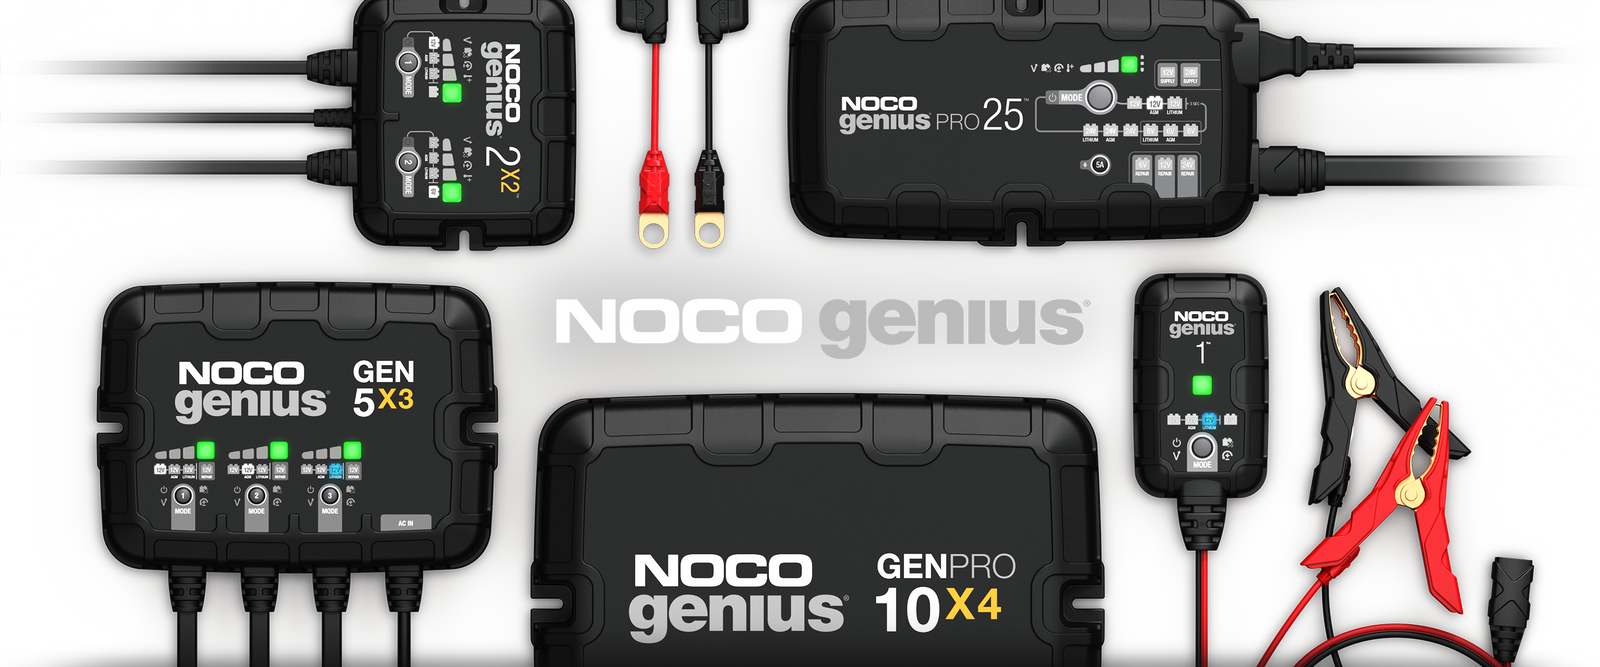 NOCO Genius Battery Chargers